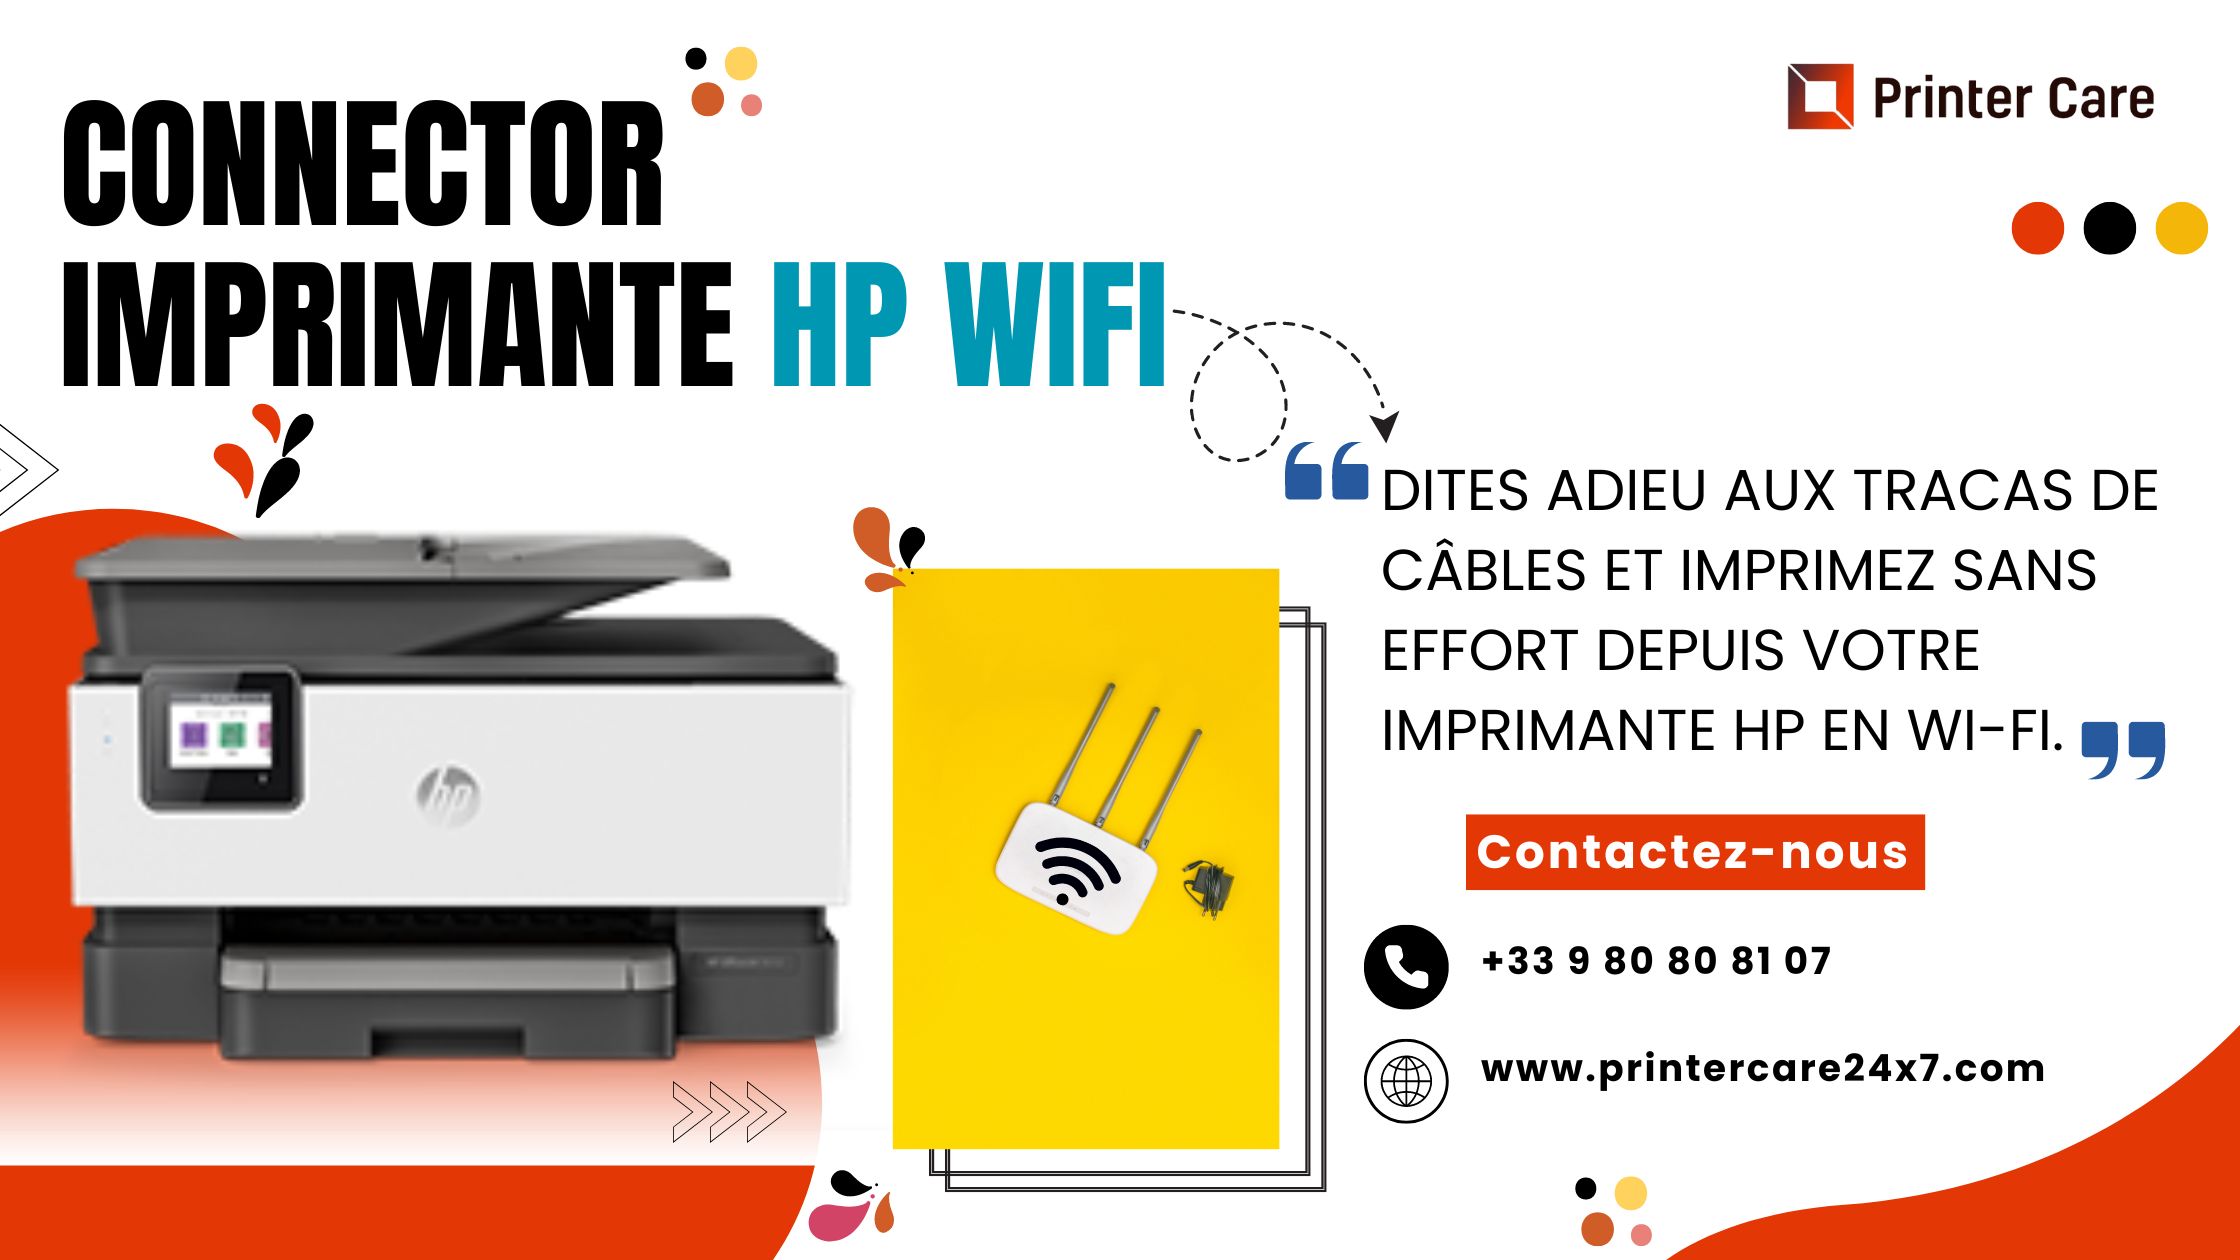 connecter imprimante hp wifi | +33 9 80 80 81 07 | Our Wall Blog